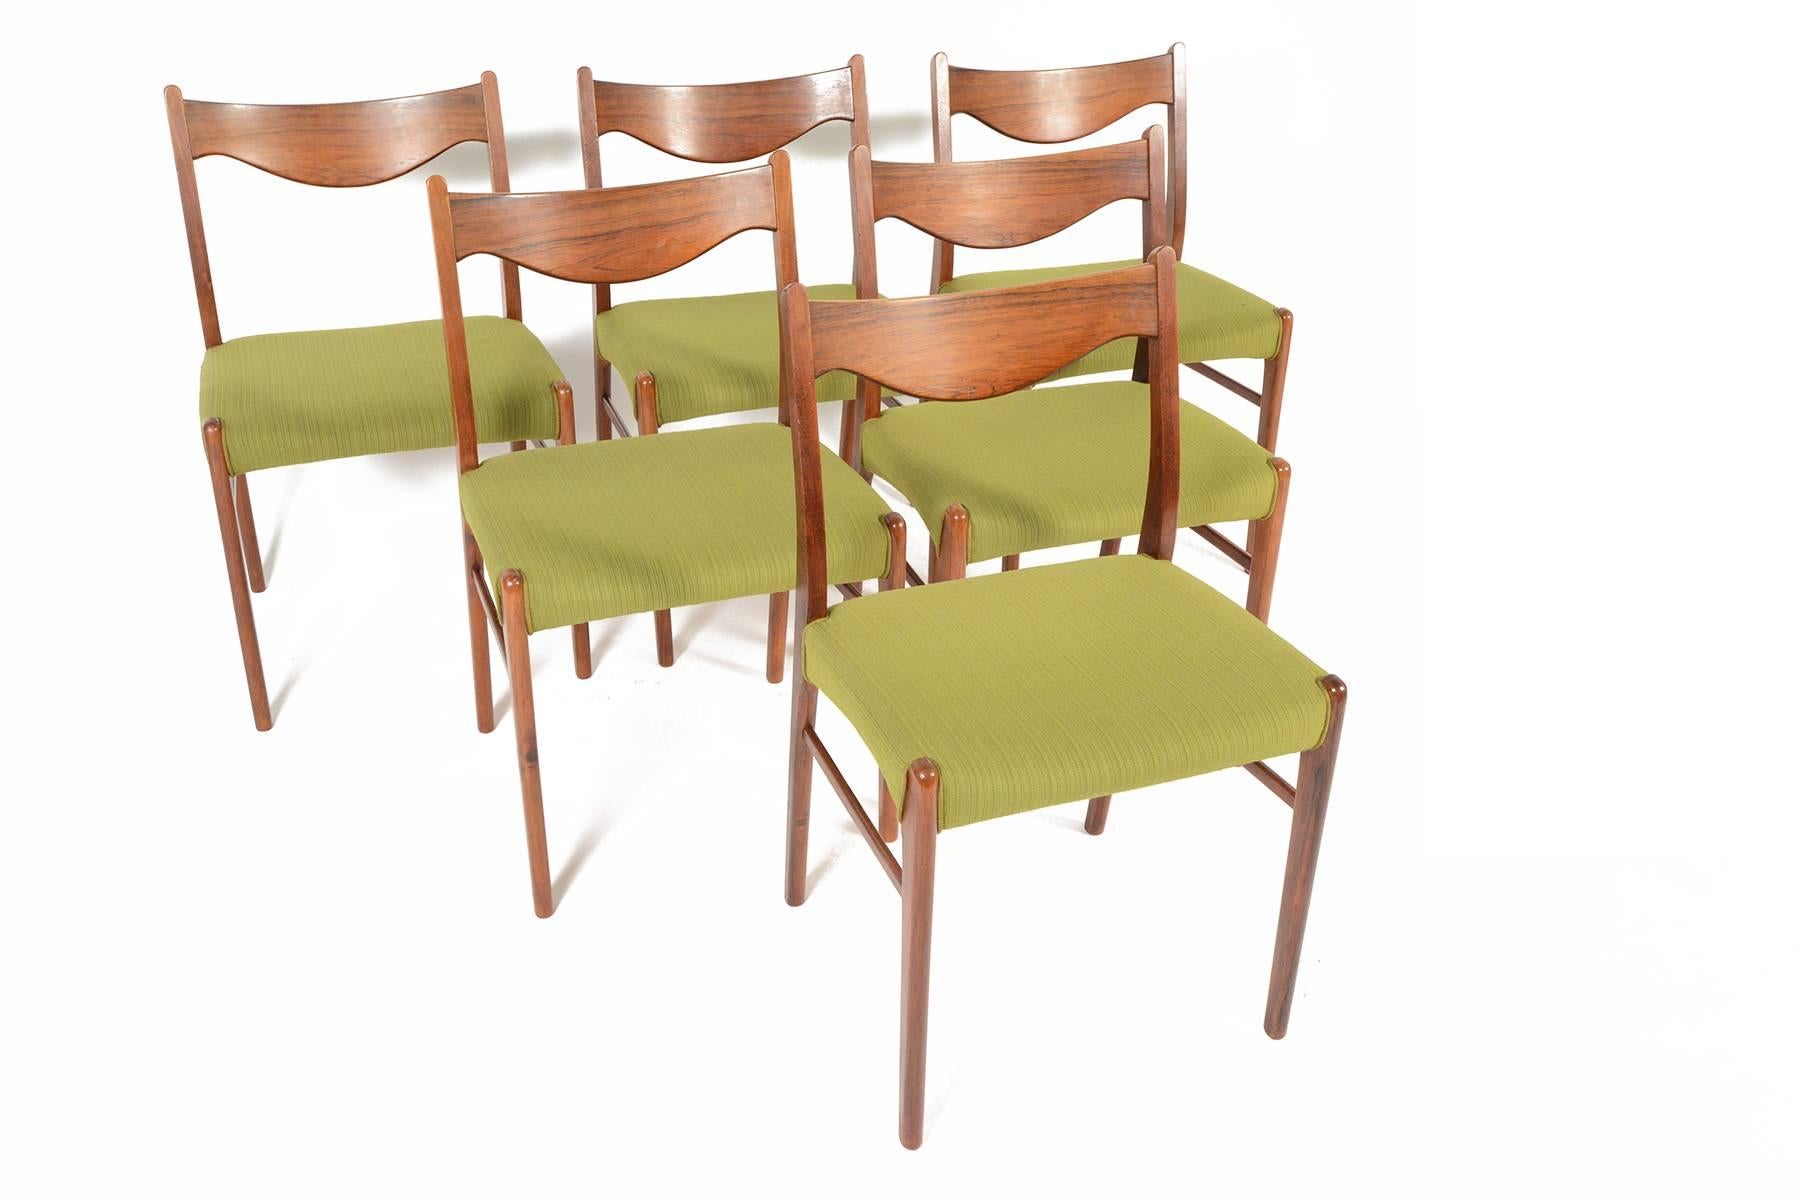 This set of six Danish modern mid century dining chairs was designed by Arne Wahl Iverson for Glyngøre Stolefabrik as model 